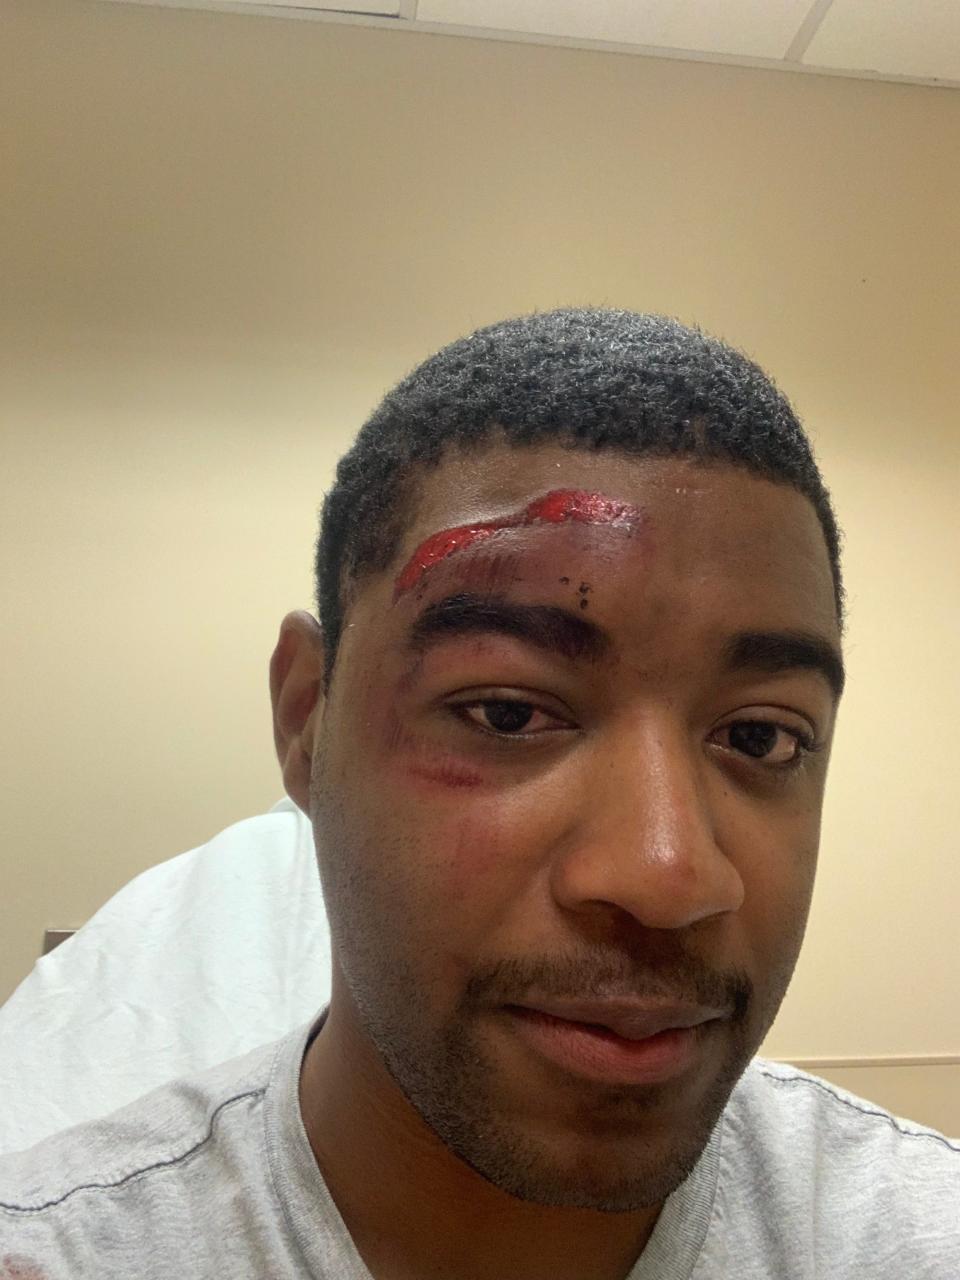 Nahshon Bain-Greenidge, 29, a shift manager with Starbucks in West Knoxville said he was violently arrested by Knox County Sheriff's officers while on duty Oct.21